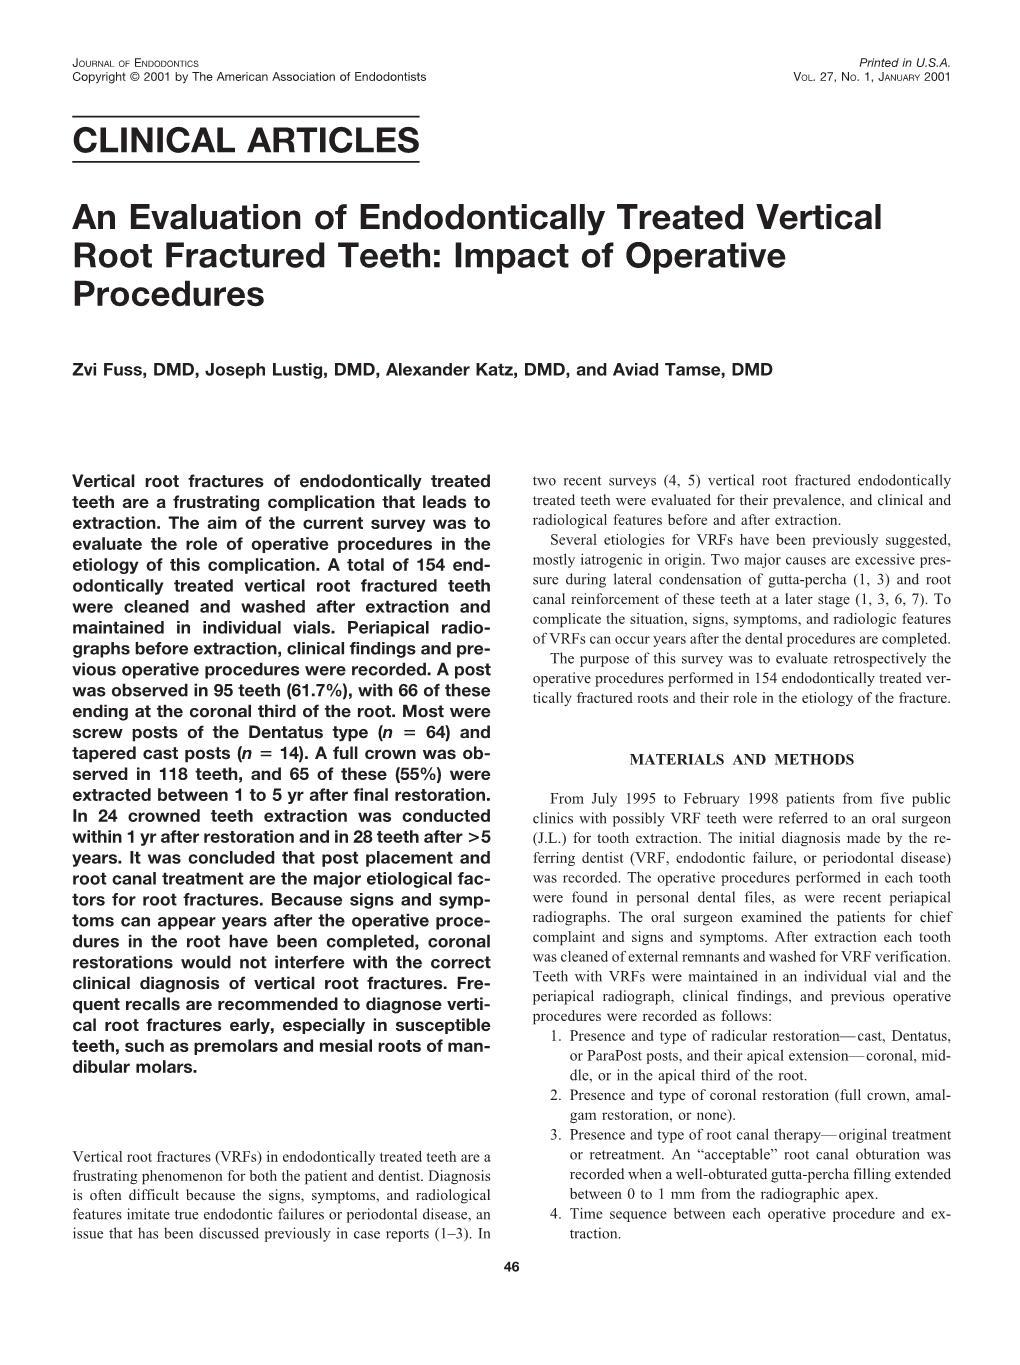 CLINICAL ARTICLES an Evaluation of Endodontically Treated Vertical